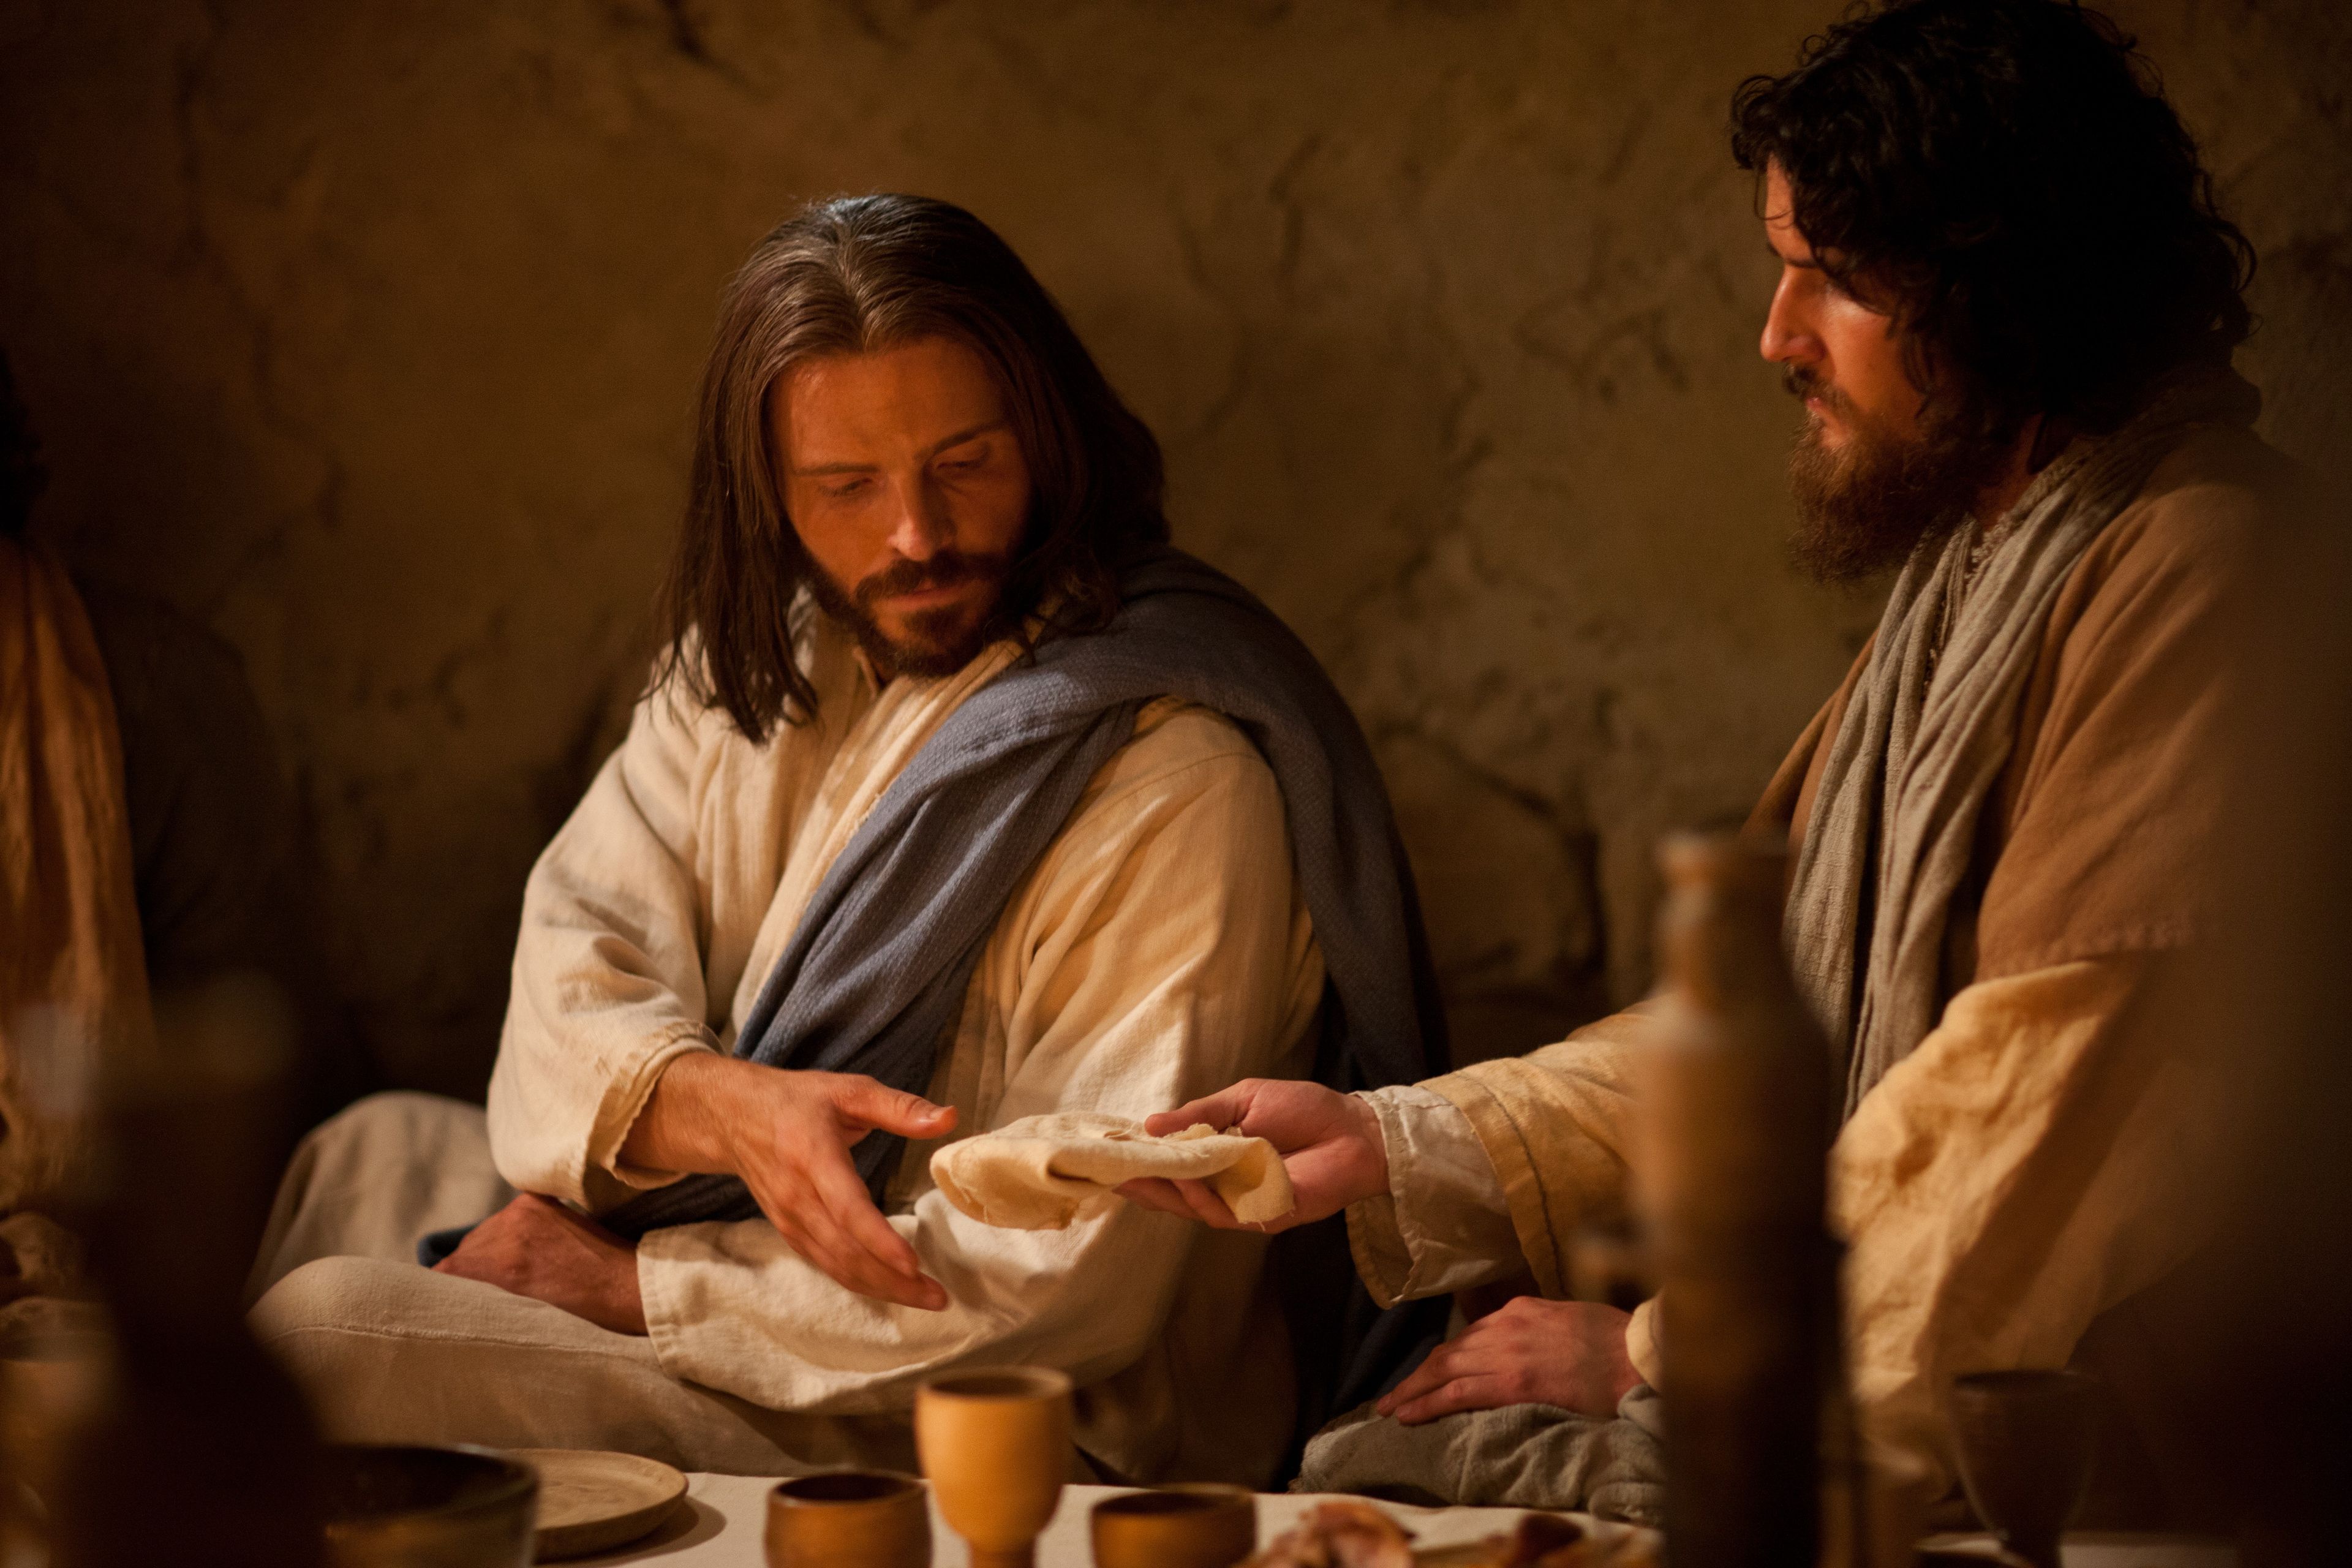 Jesus passing bread to James at the Last Supper.